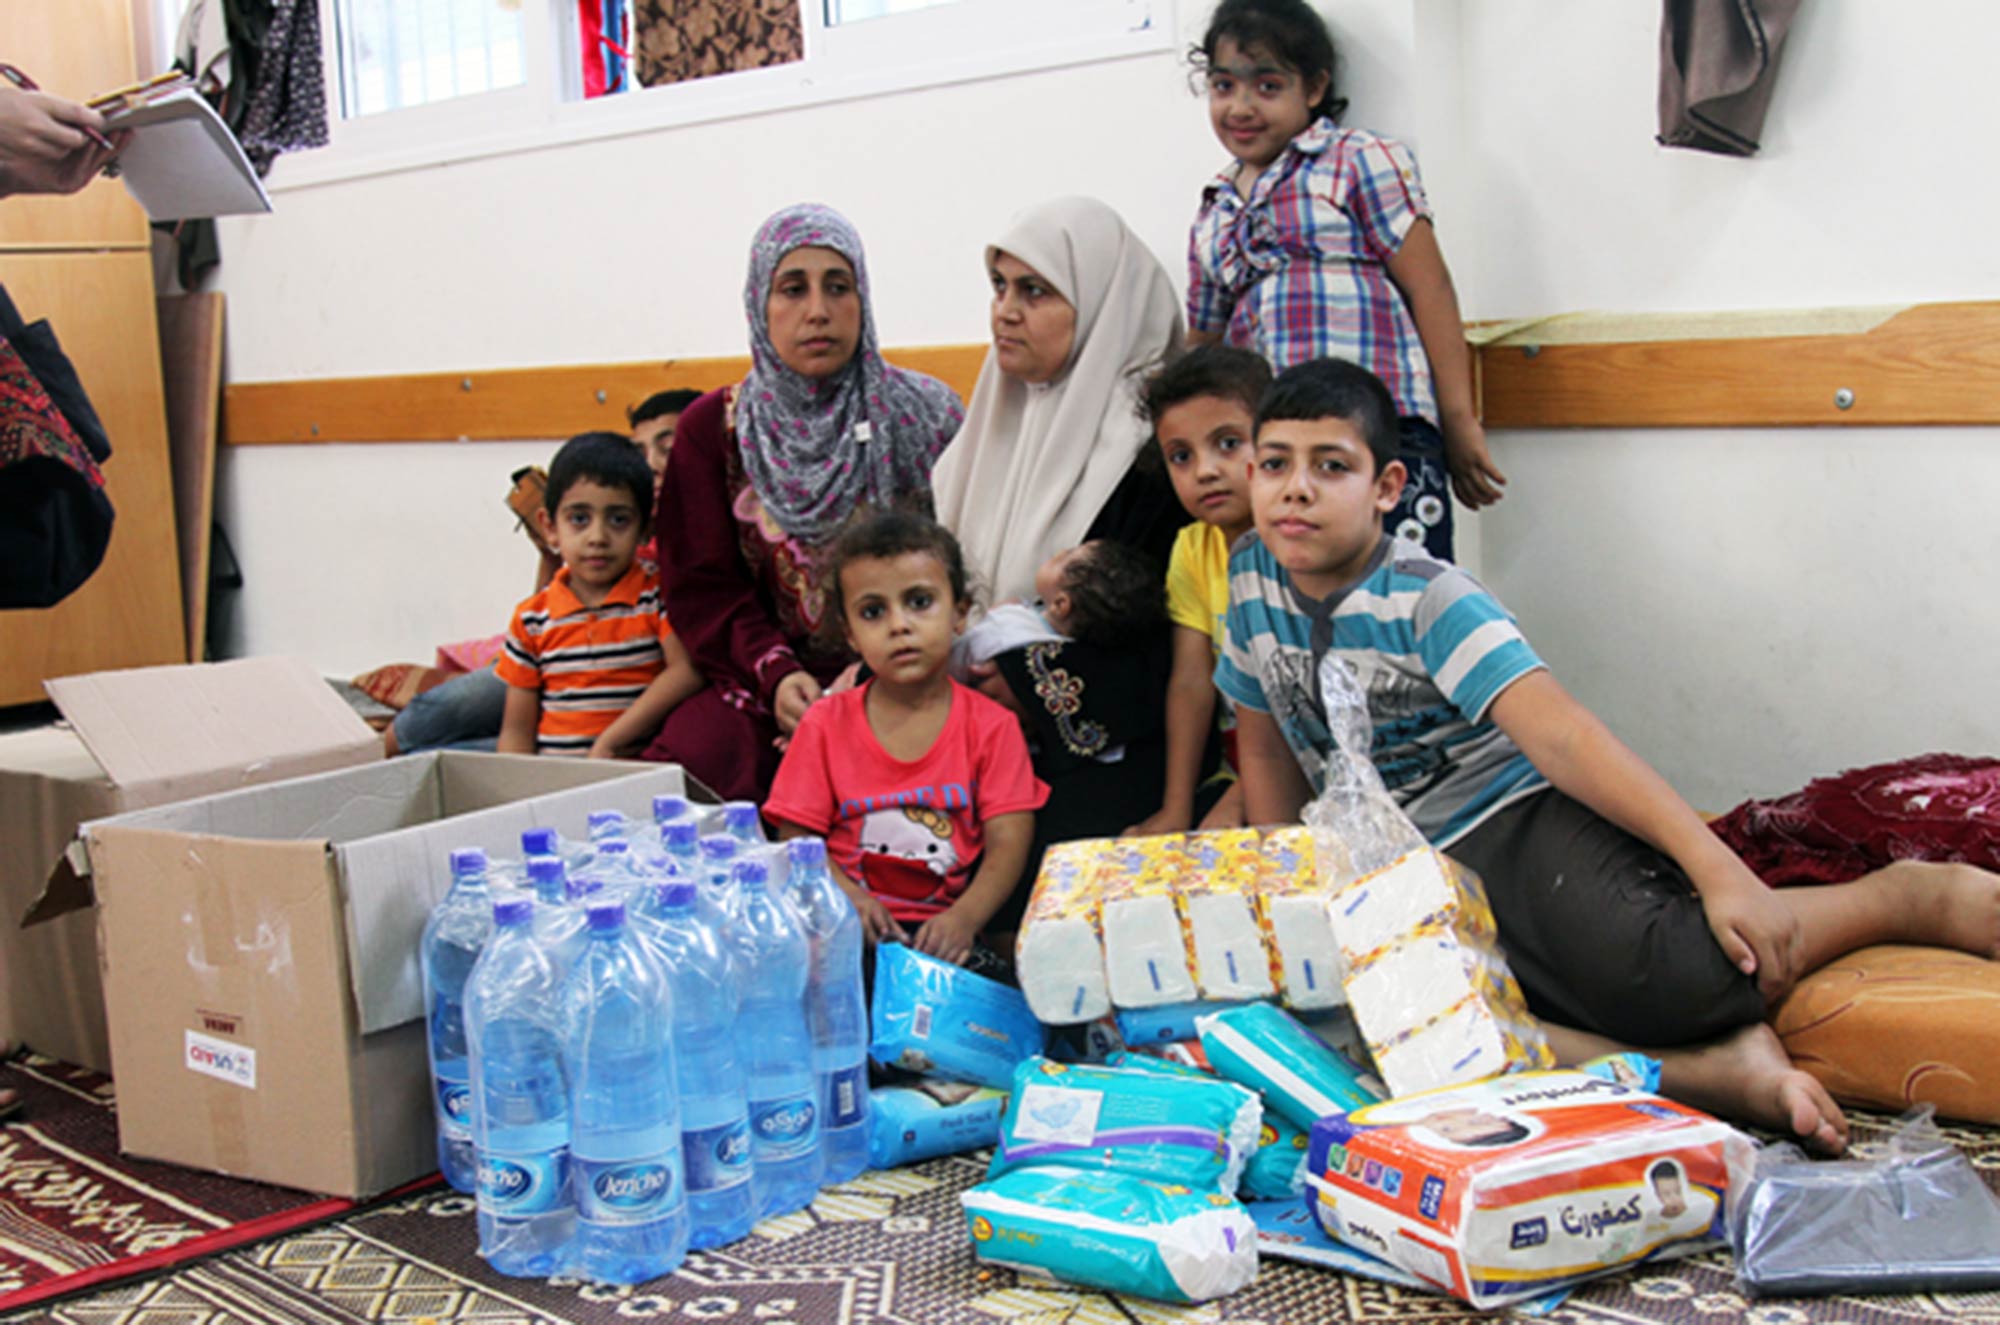 Um Khalil Skaik and her family, displaced and living in a UN school shelter in Gaza following the 2014 conflict.